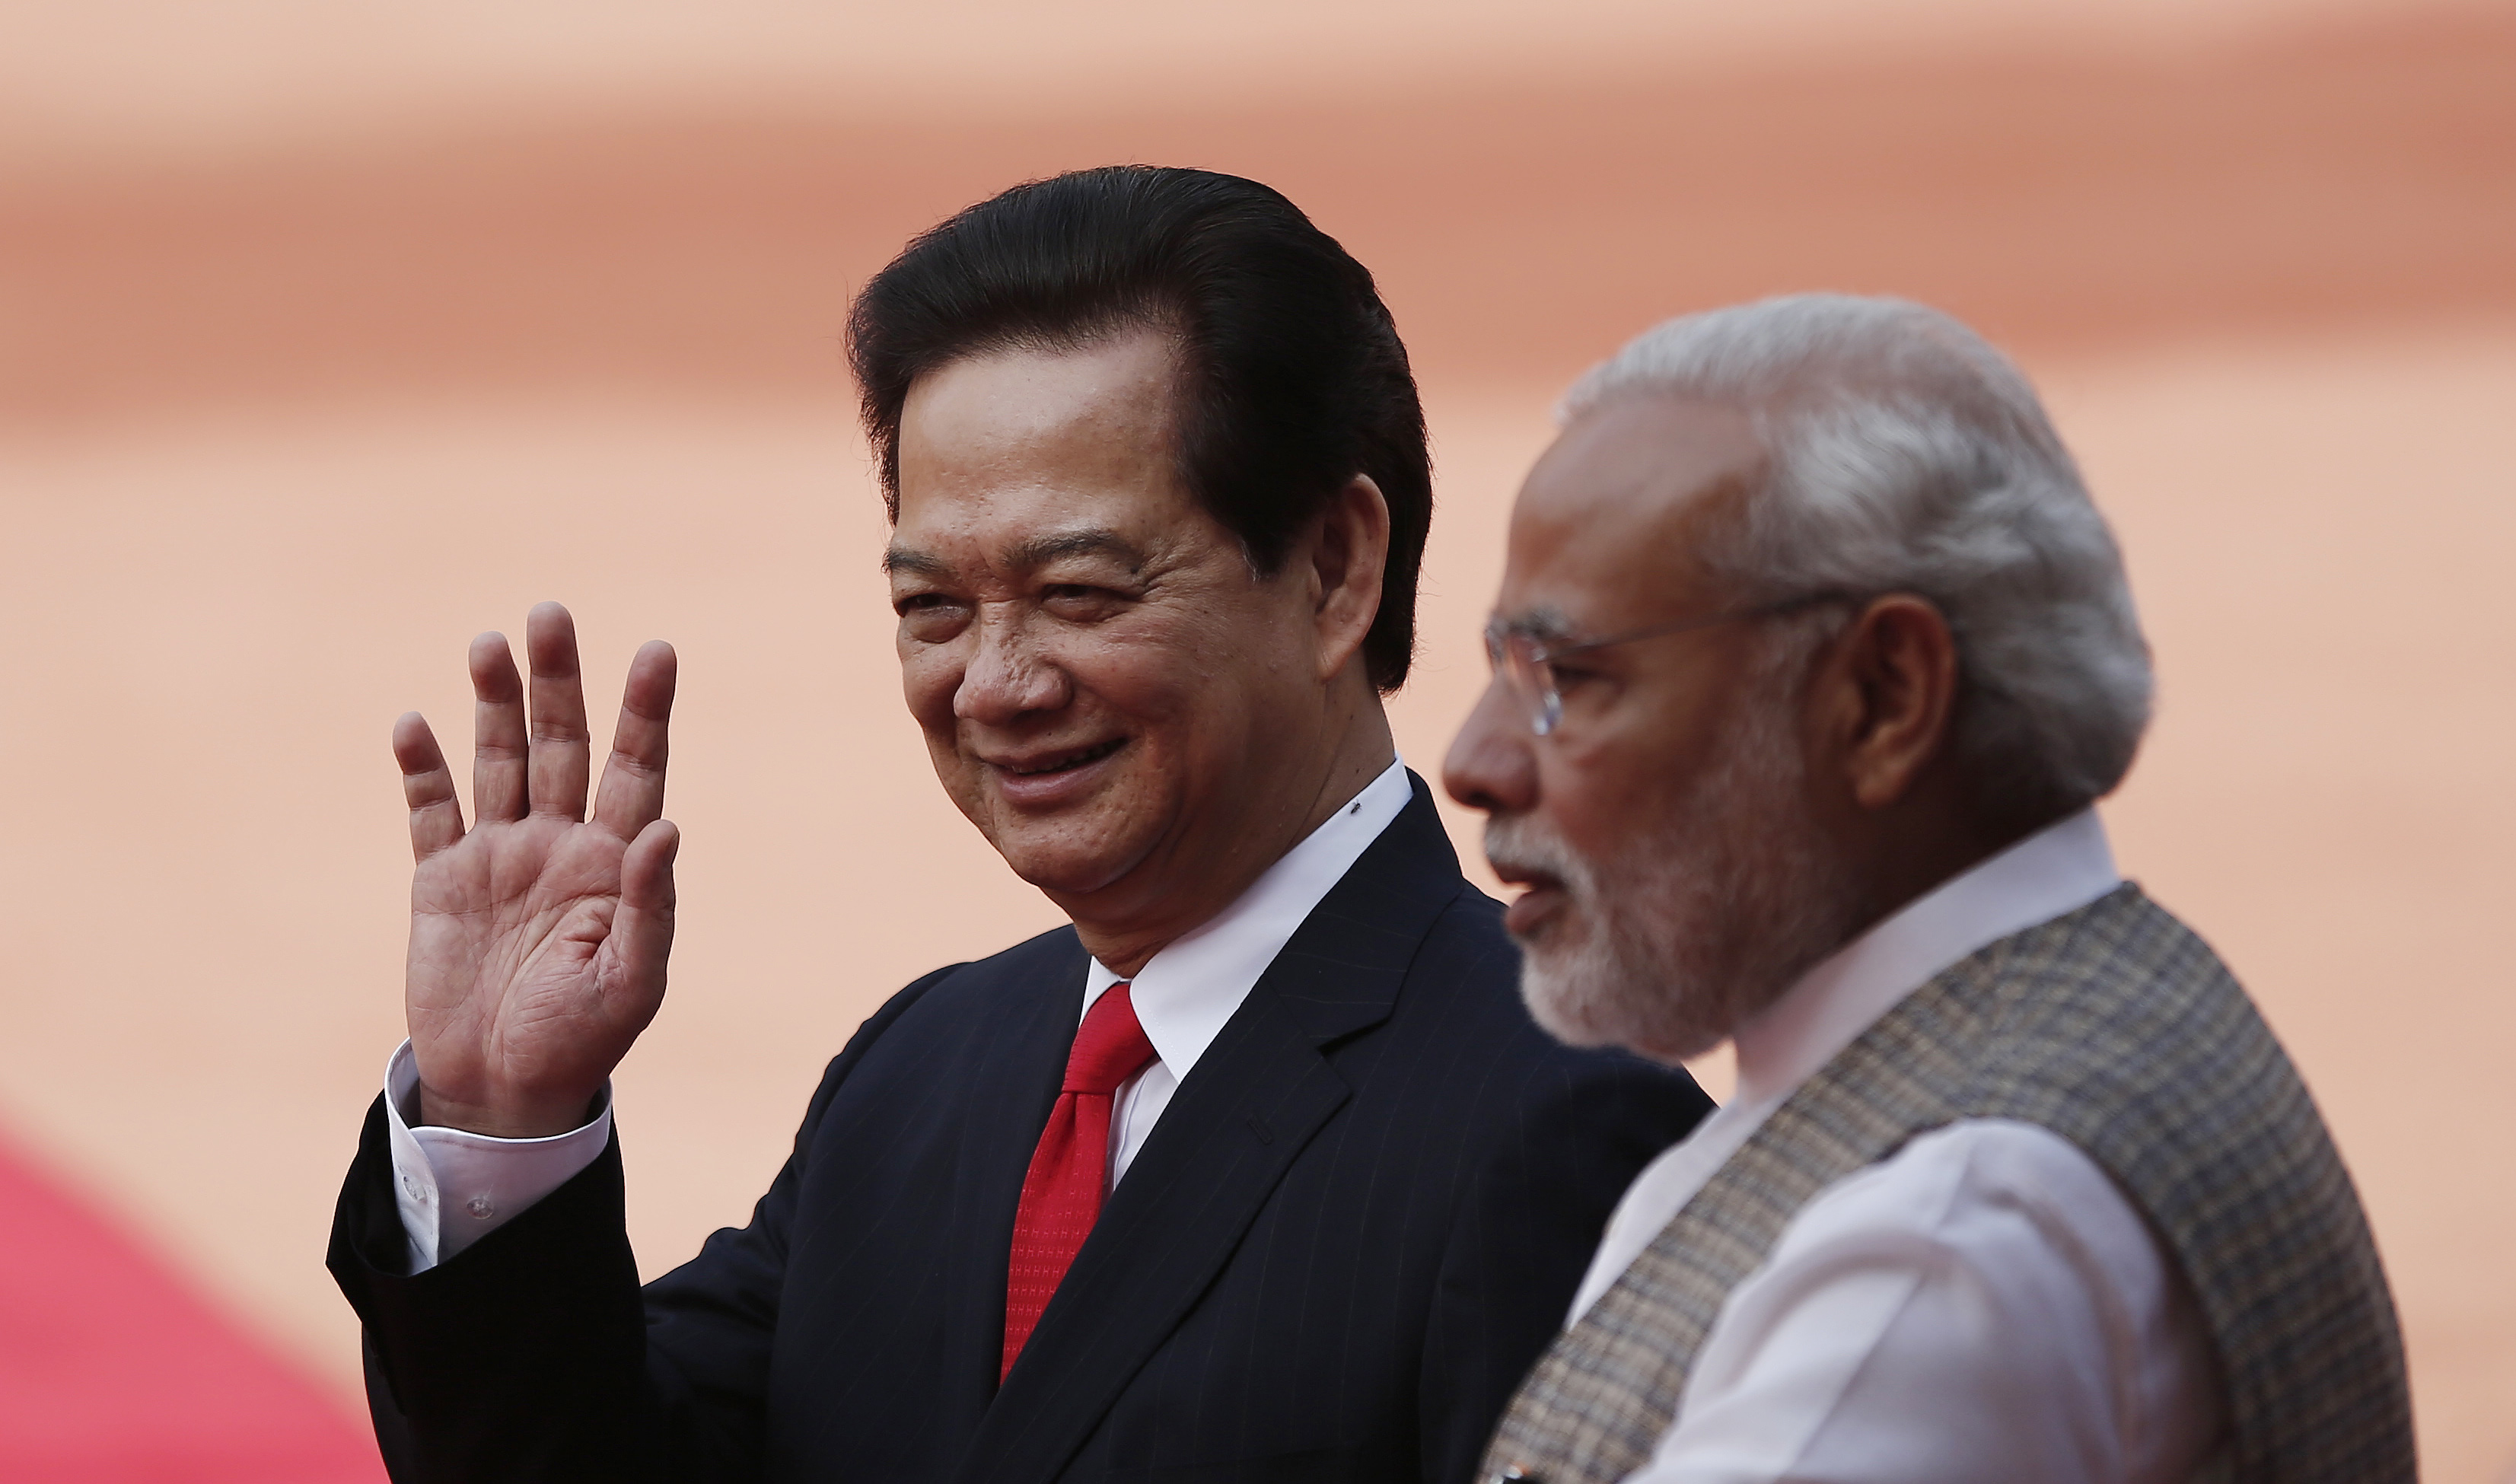 Vietnam's Prime Minister Nguyen Tan Dung waves next to his Indian counterpart Narendra Modi during Dung's ceremonial reception at the forecourt of India's presidential palace in New Delhi on Oct. 28, 2014 (Adnan Abidi—Reuters)